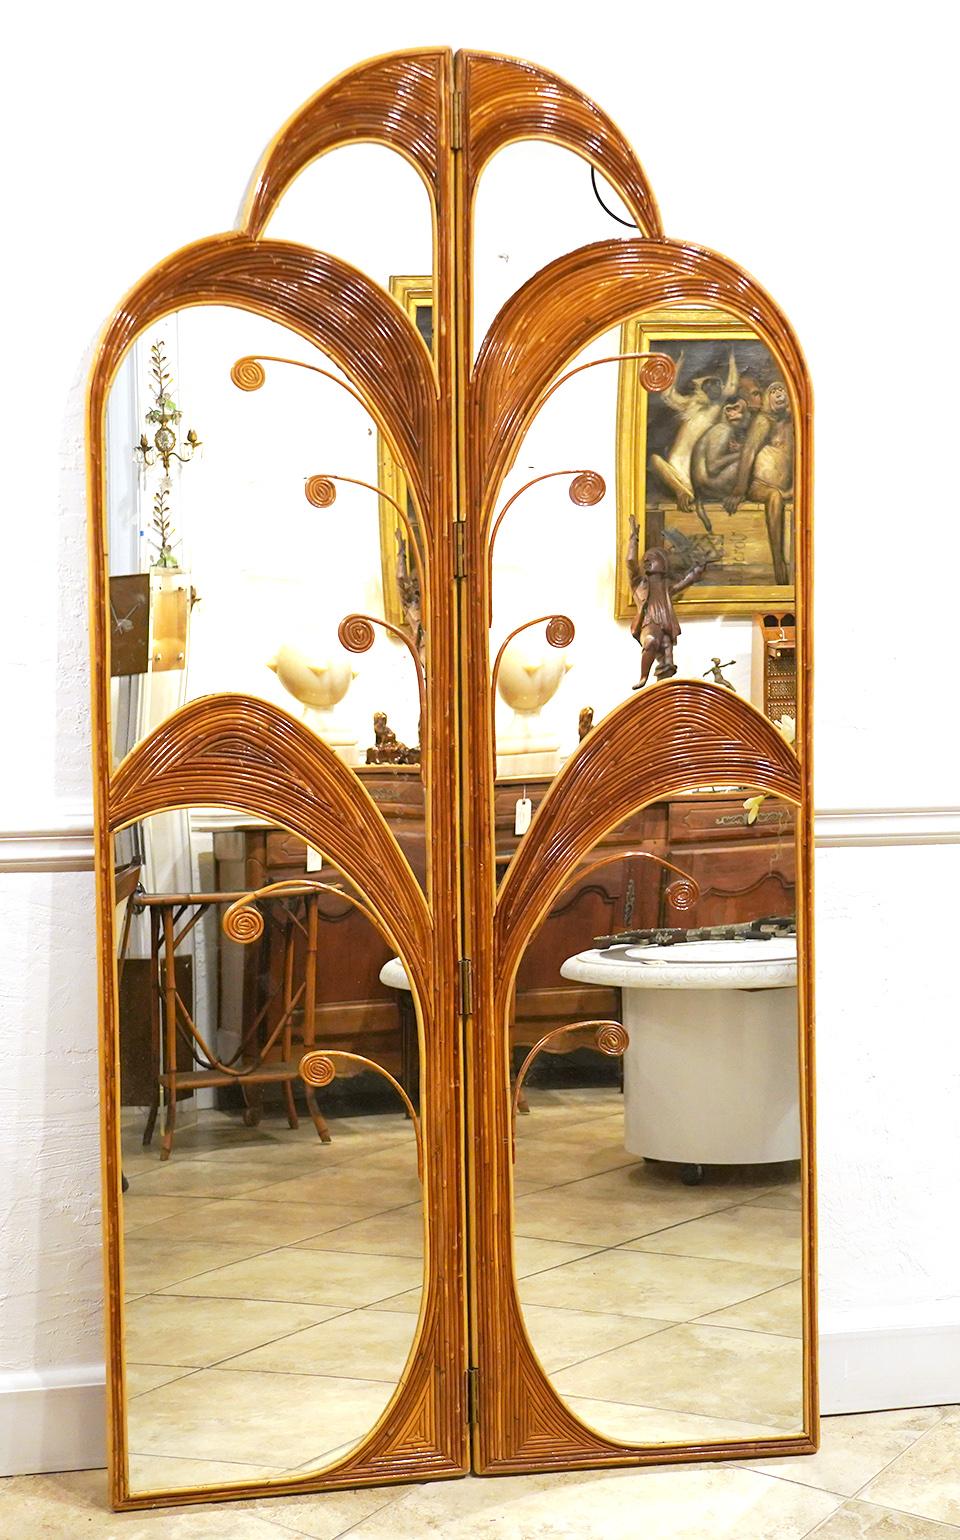 This pair of bamboo or rattan inlaid mirrored folding screens in the style of Vival del Sud feature art deco stylized palm trees hinged and with arched tops framing mirrors from top to bottom. The pair of panels can be used separately or as a